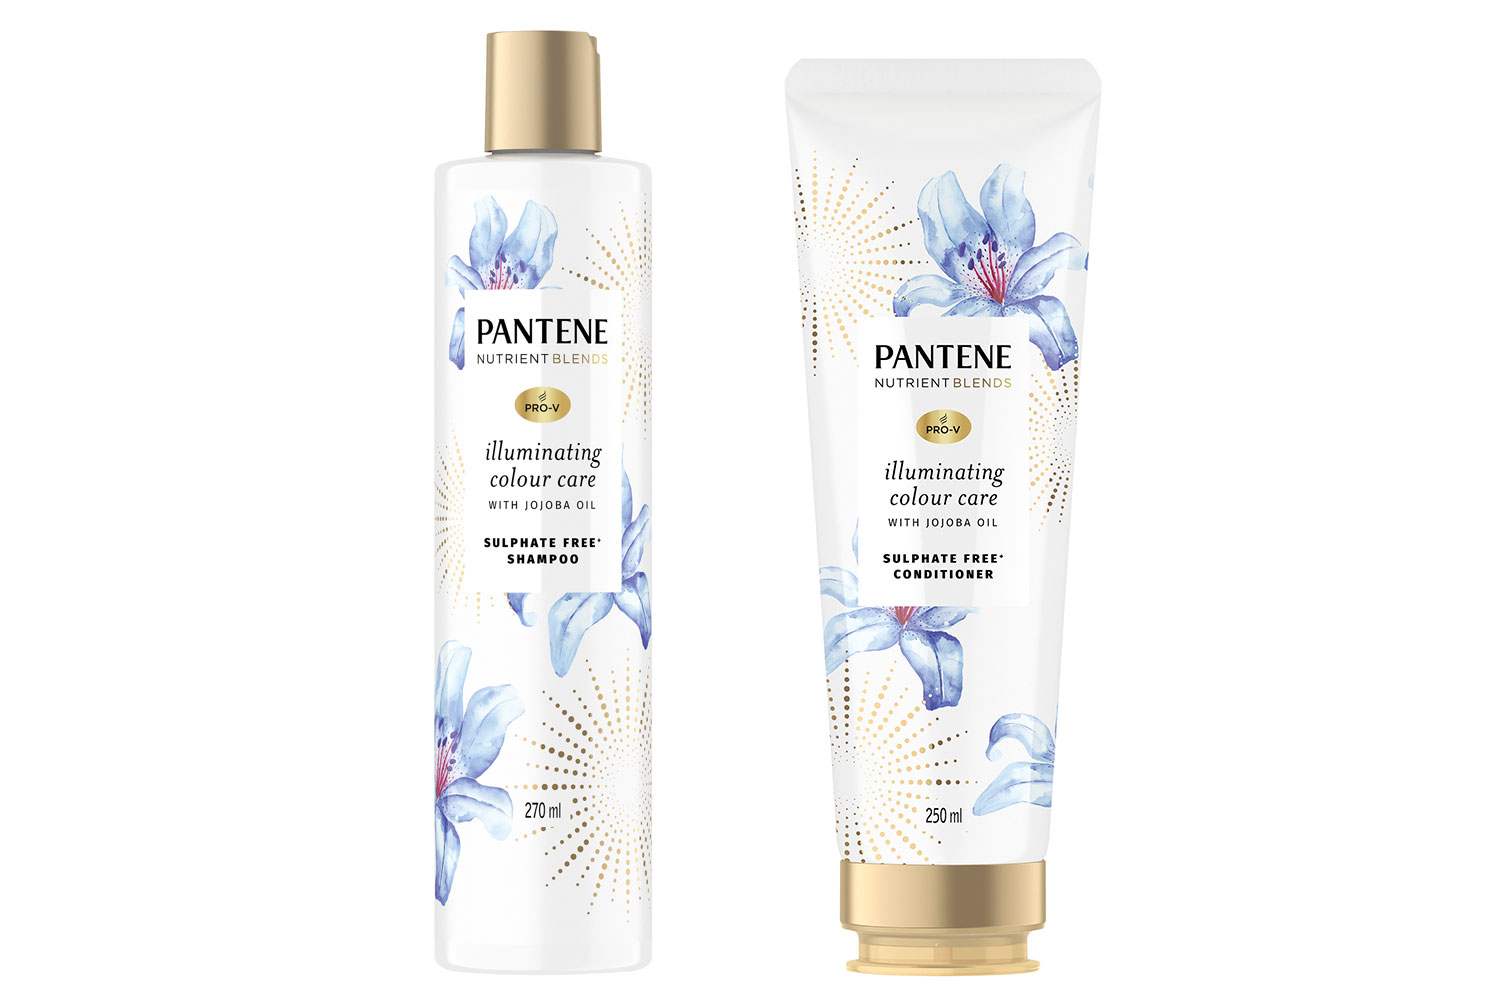 . Pantene Nutrient Blends Sulphate-Free* ‘Illuminating Colour Care with Jojoba Oil